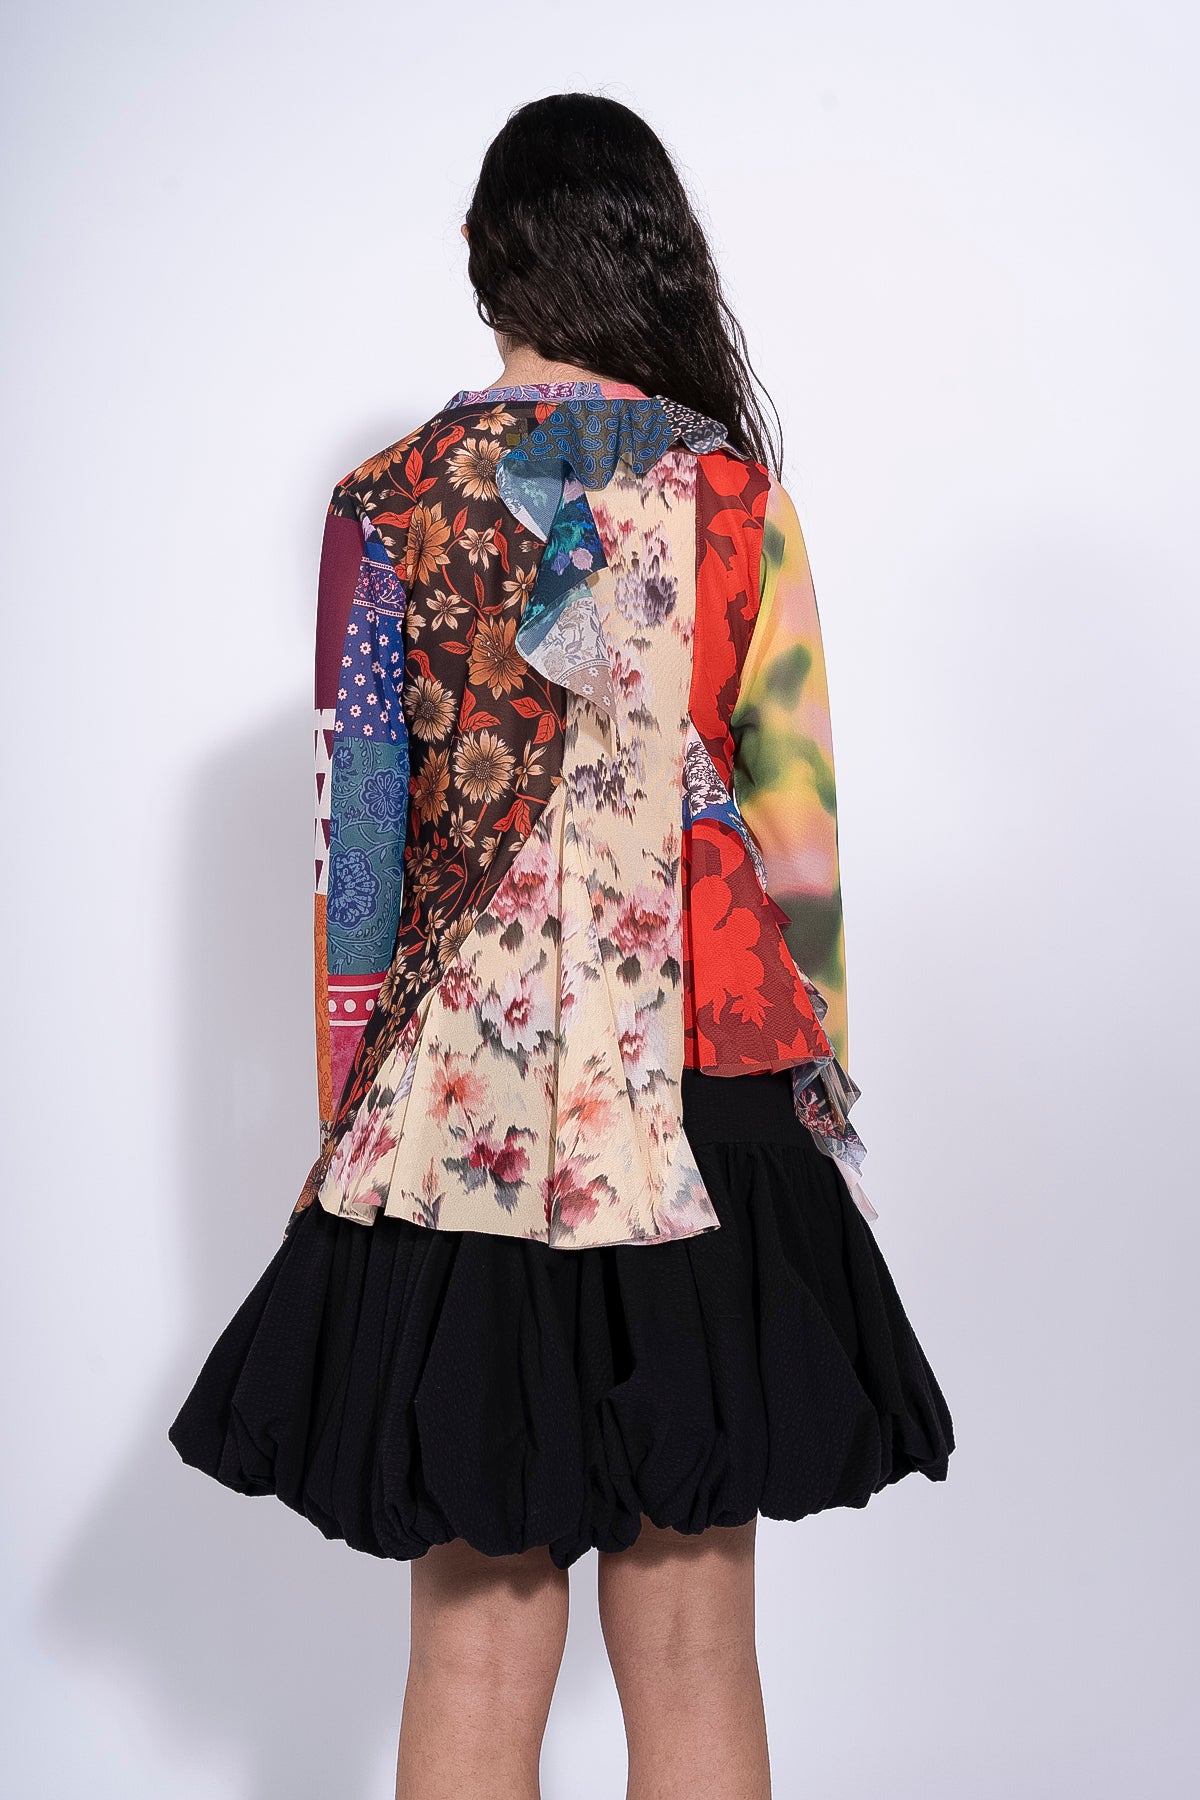 PATCHWORK PRINT MESH TOP WITH FRILLS marques almeida